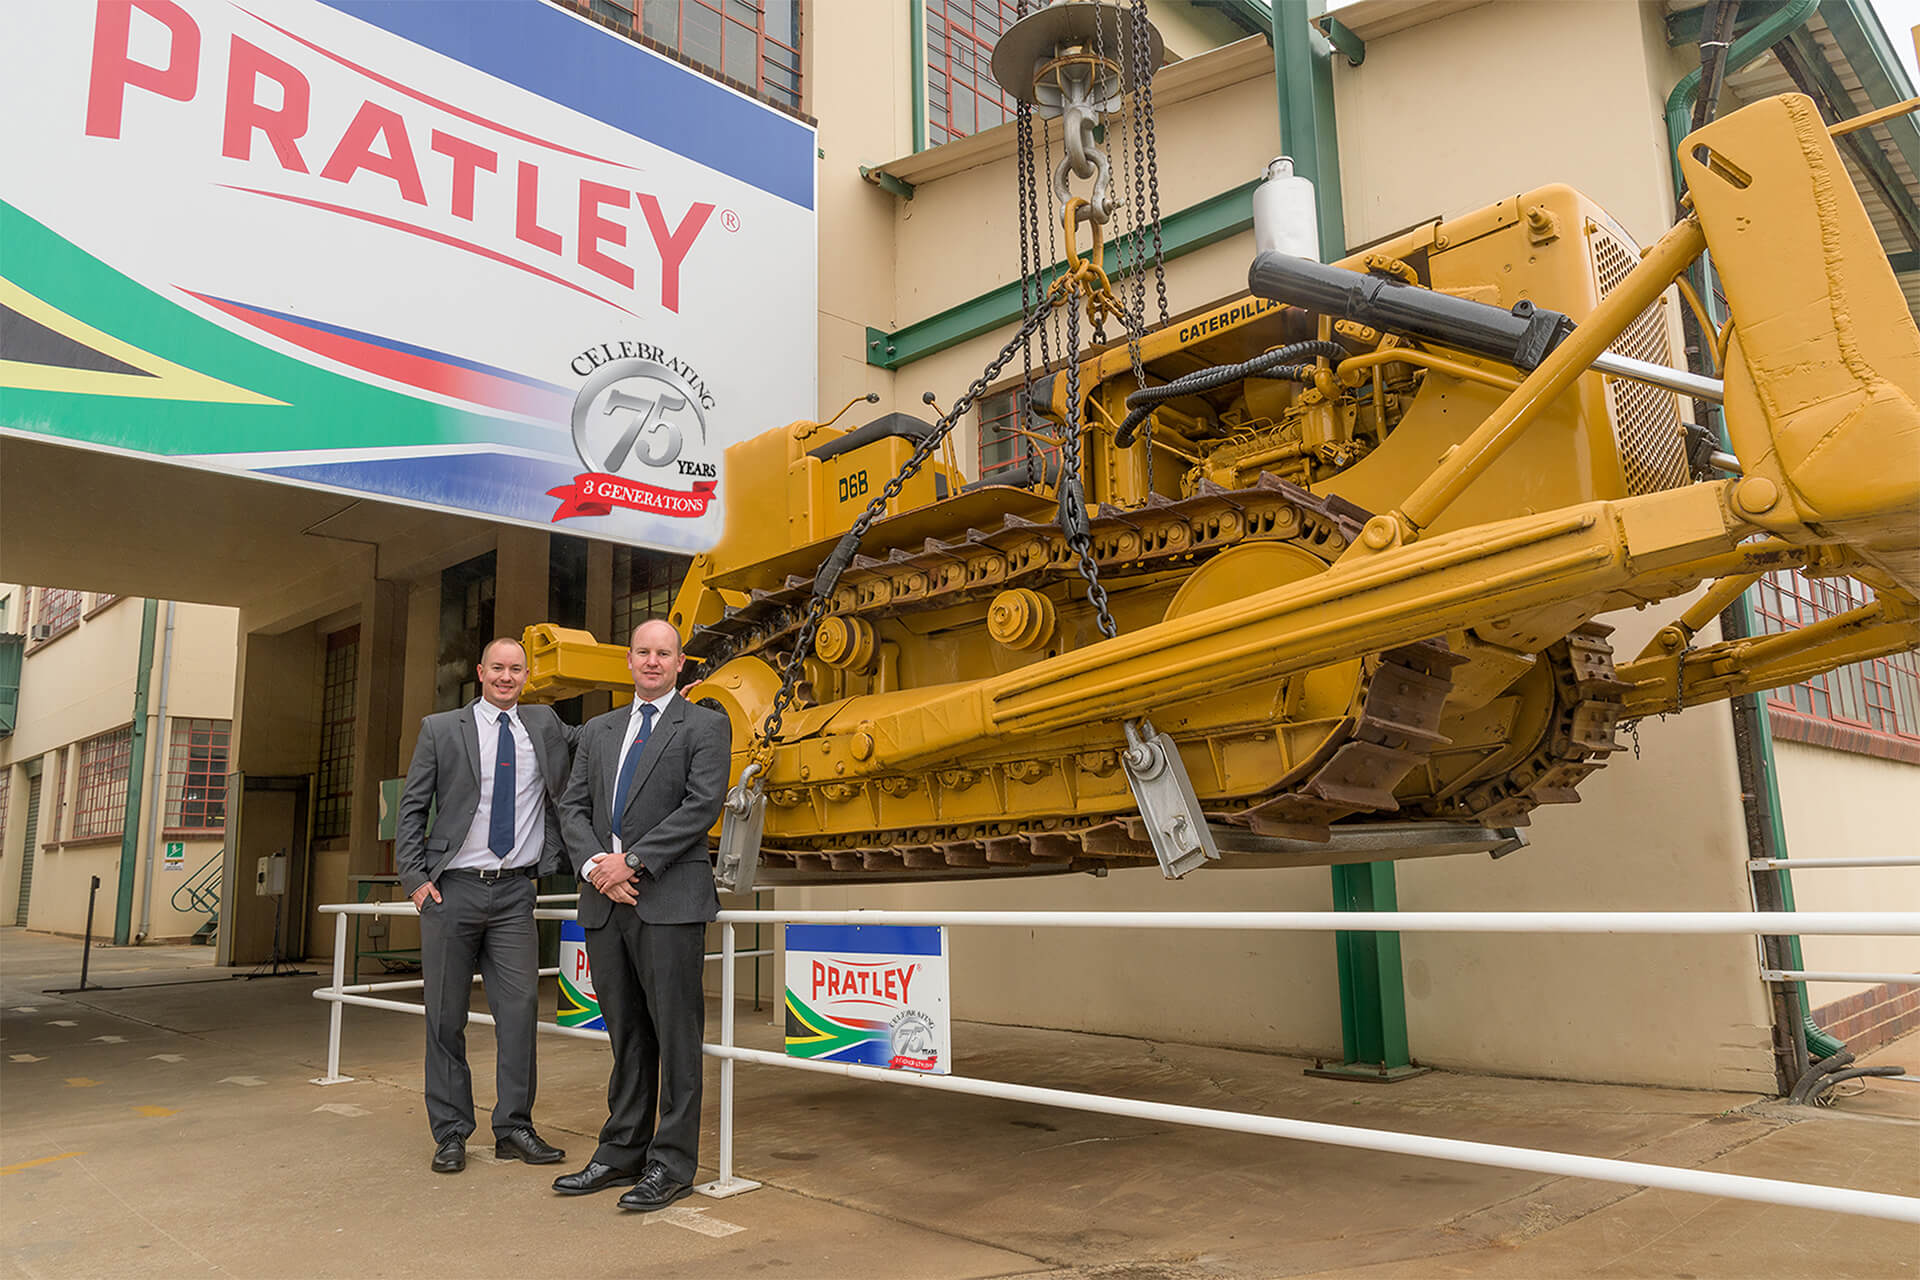 Tag_Post_2023 marks 75 years of Pratley innovation